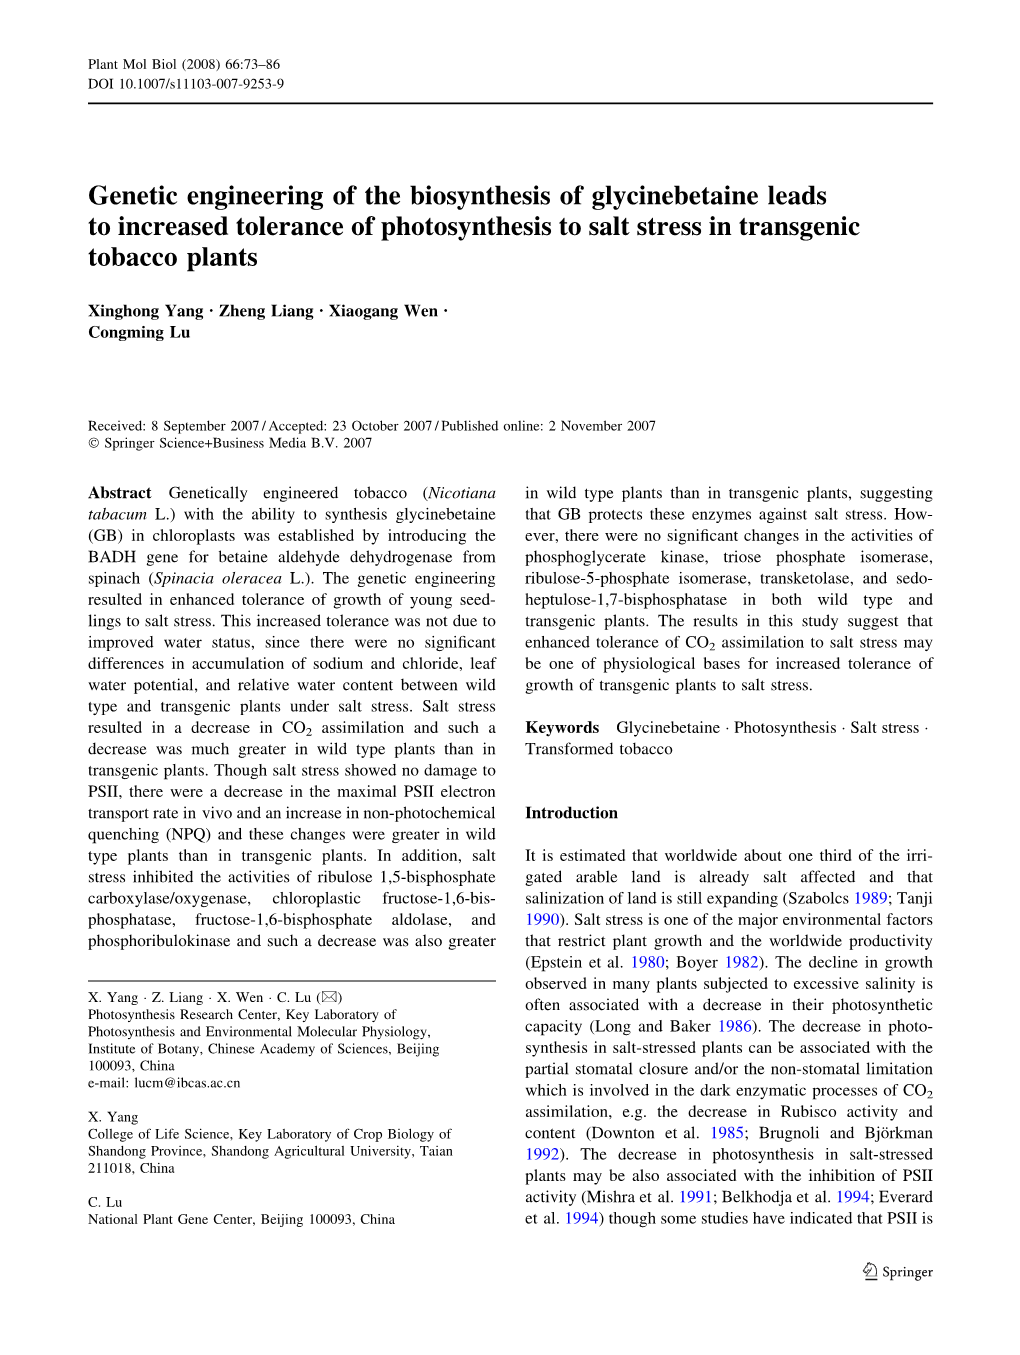 Genetic Engineering of the Biosynthesis of Glycinebetaine Leads to Increased Tolerance of Photosynthesis to Salt Stress in Transgenic Tobacco Plants